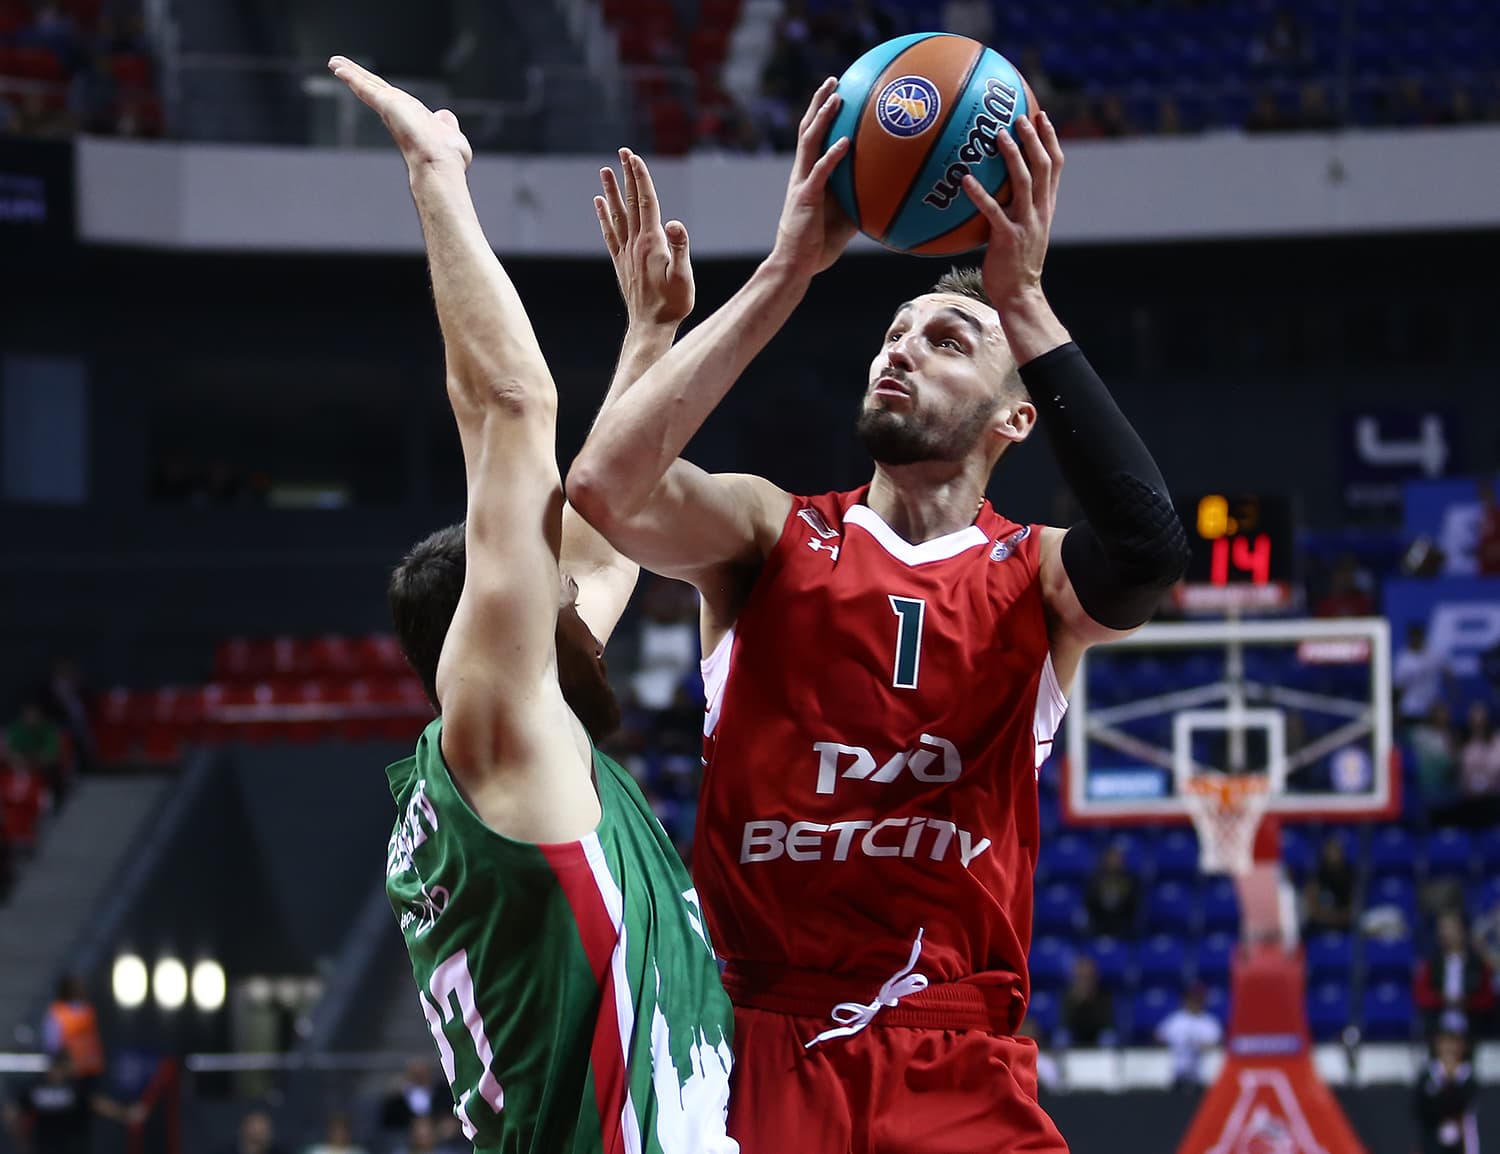 Lokomotiv beat UNICS for the first time in two years